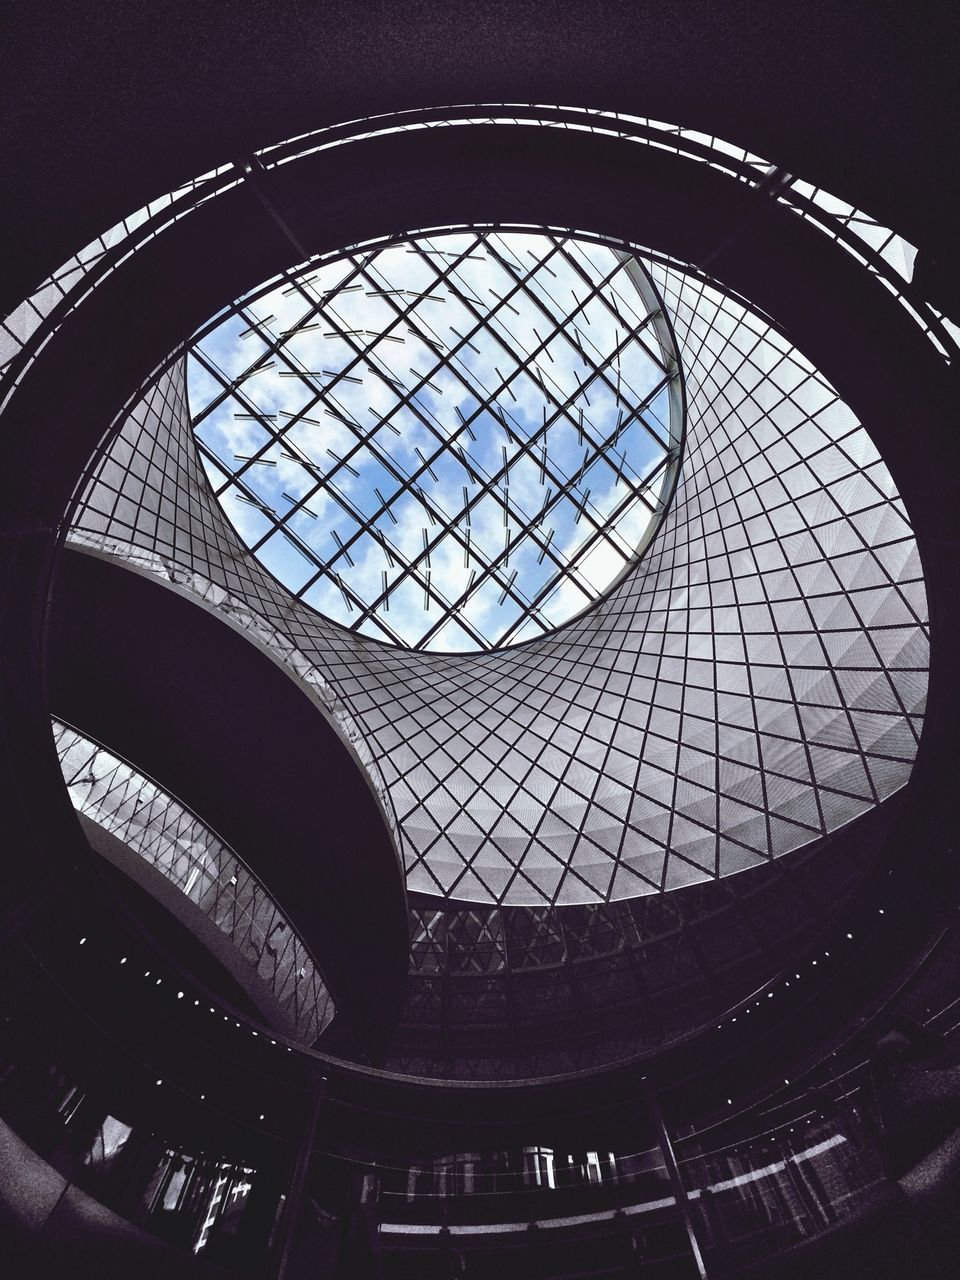 indoors, architecture, built structure, low angle view, ceiling, skylight, circle, pattern, geometric shape, arch, glass - material, window, architectural feature, design, interior, shape, building, directly below, no people, building exterior